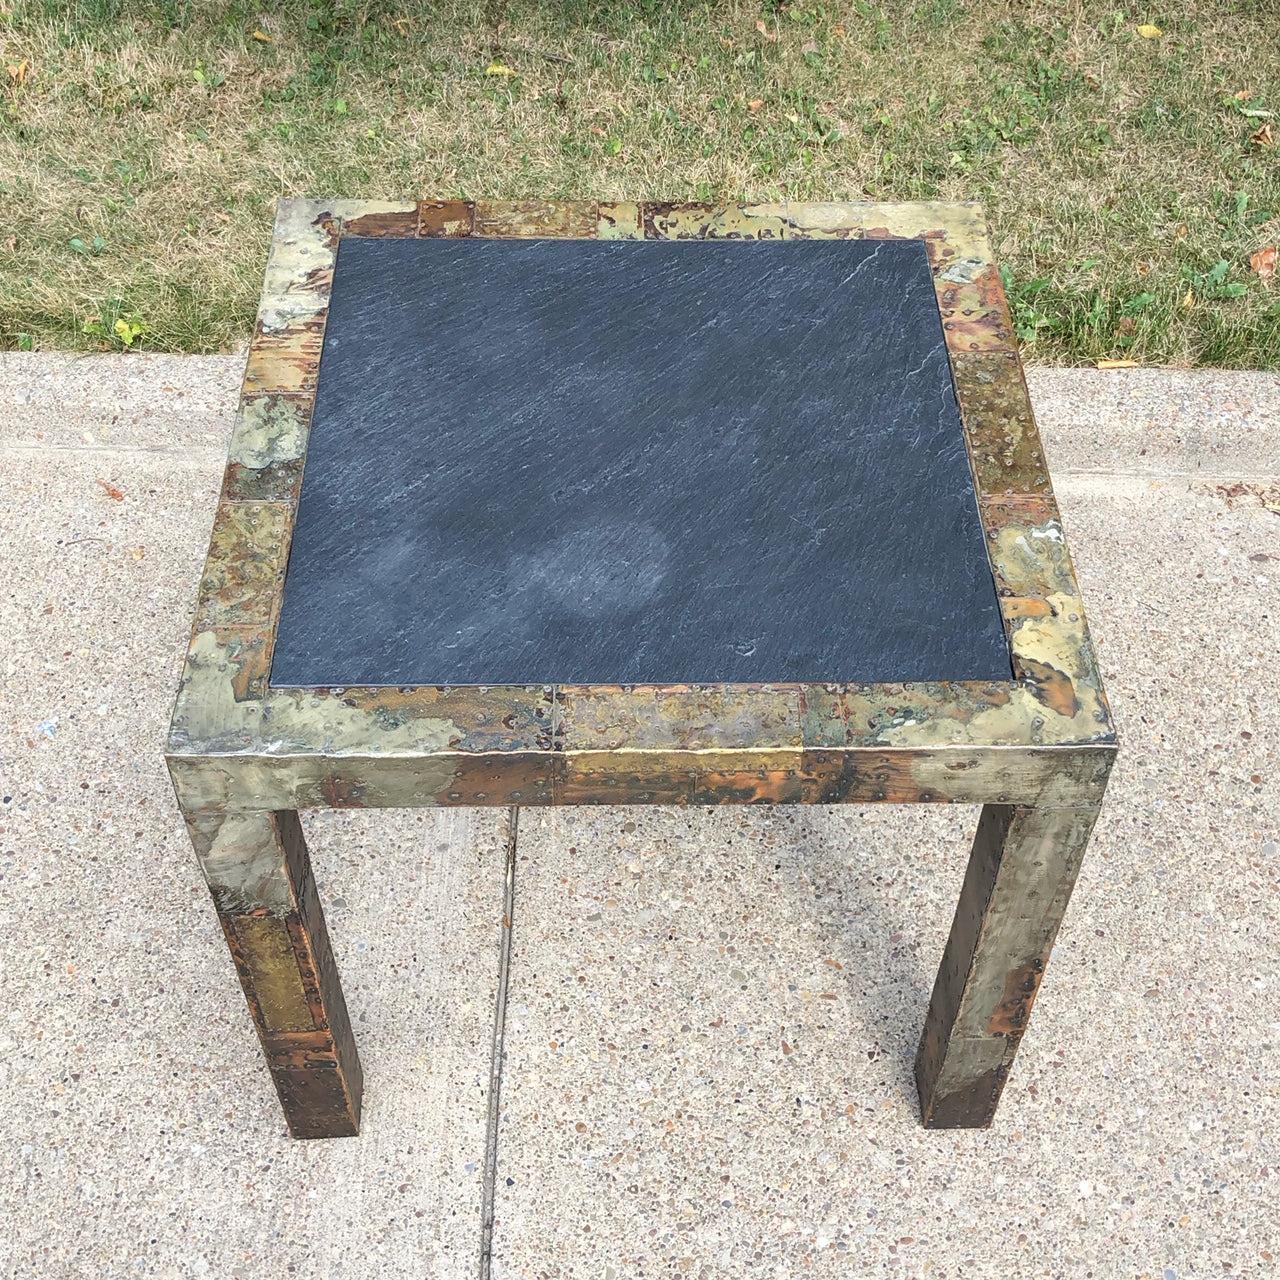 Paul Evans Studio for Directional

Patchwork Table 

Dining height but can also function as game table or entry table

New Hope, PA 1960s

Slate, Copper, Brass, Pewter

30